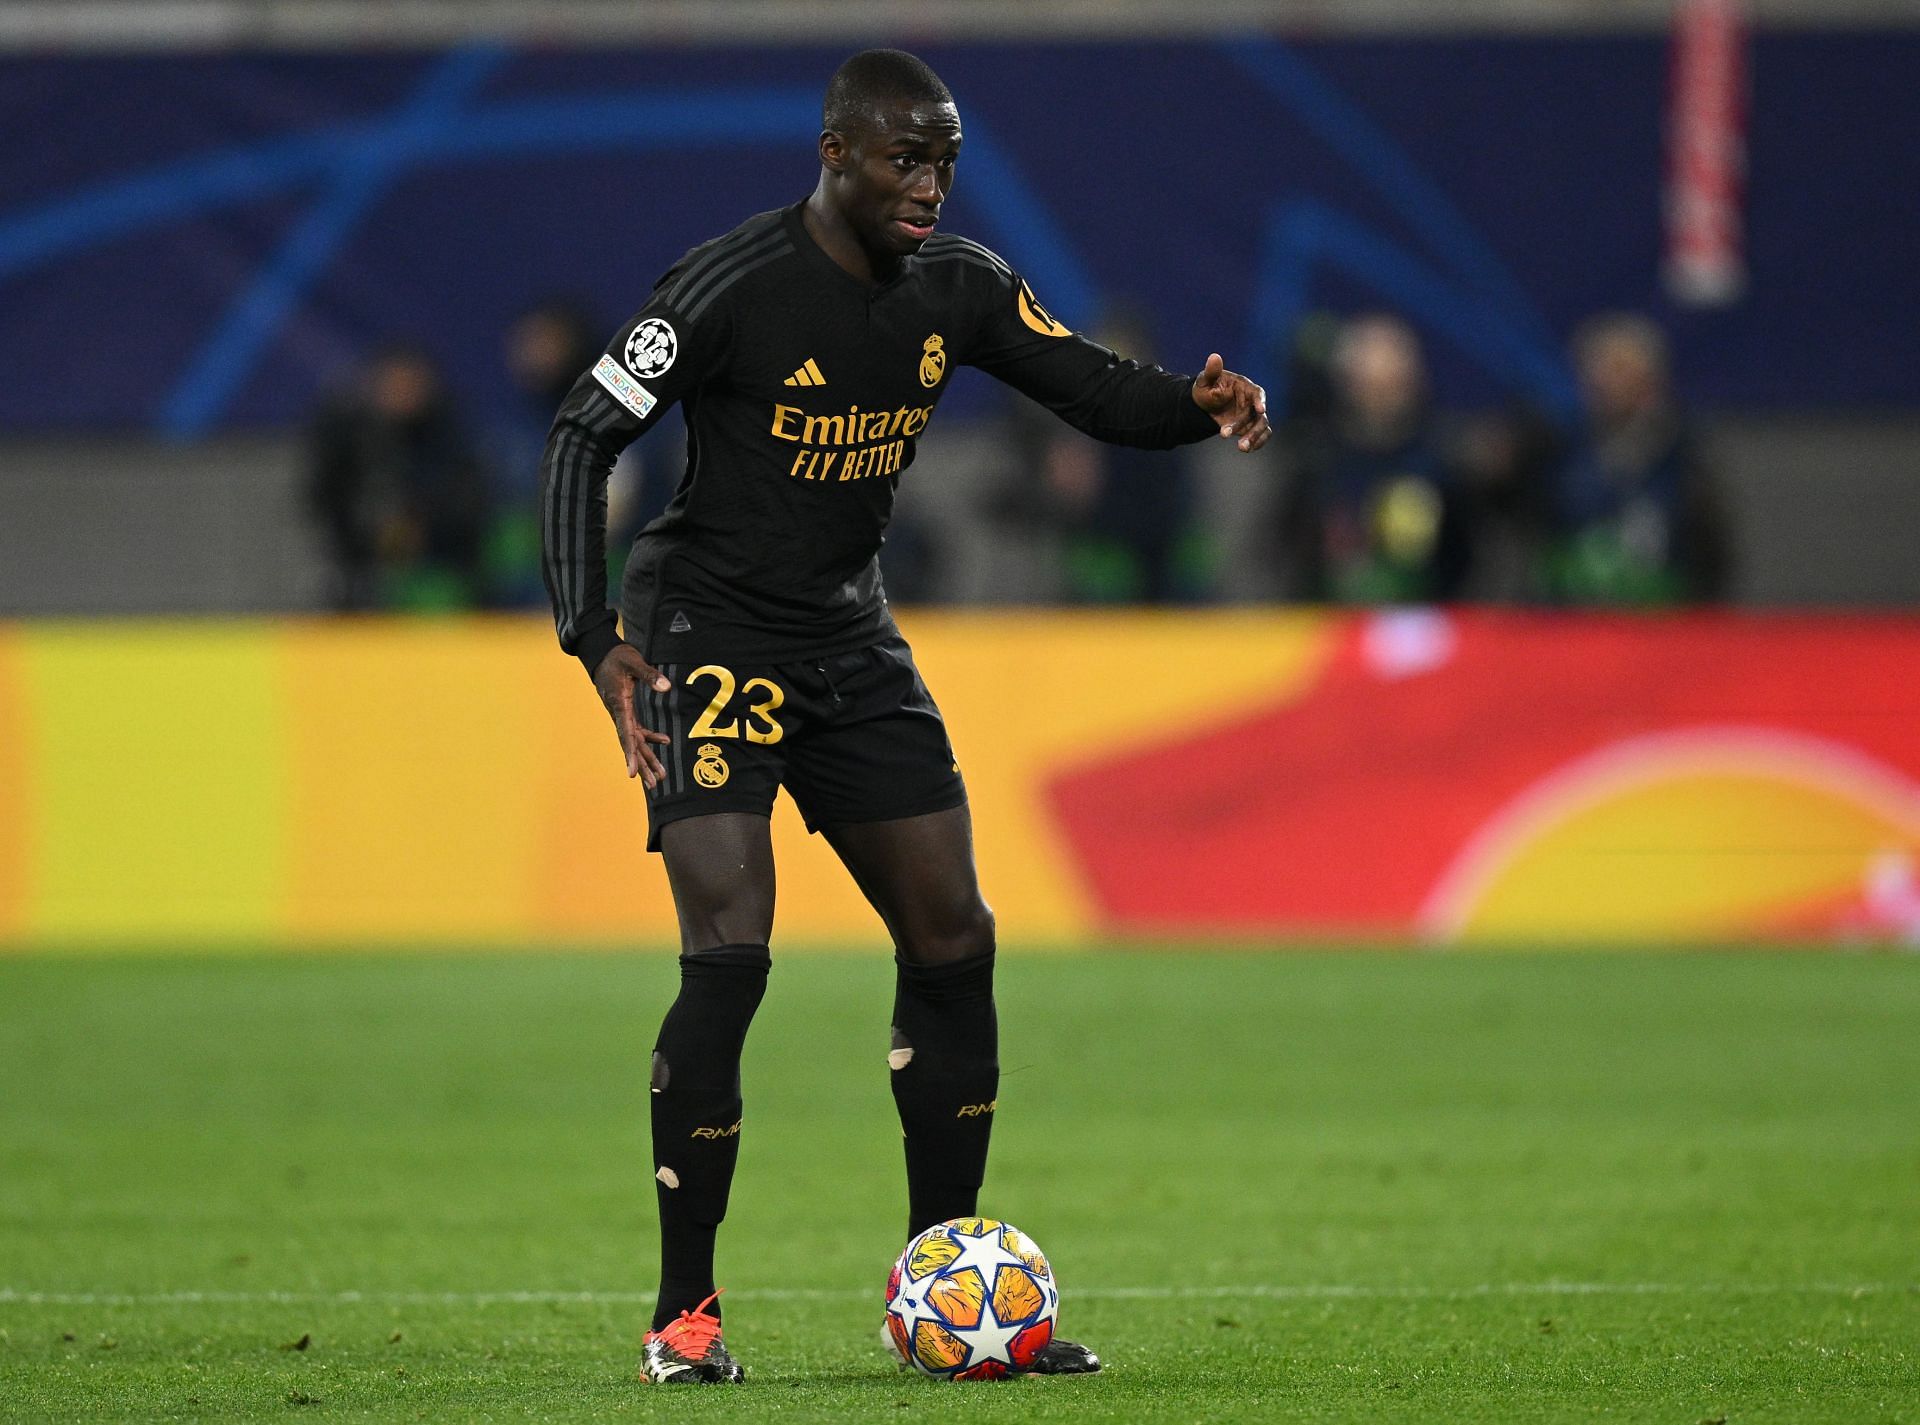 Ferland Mendy has admirers in England